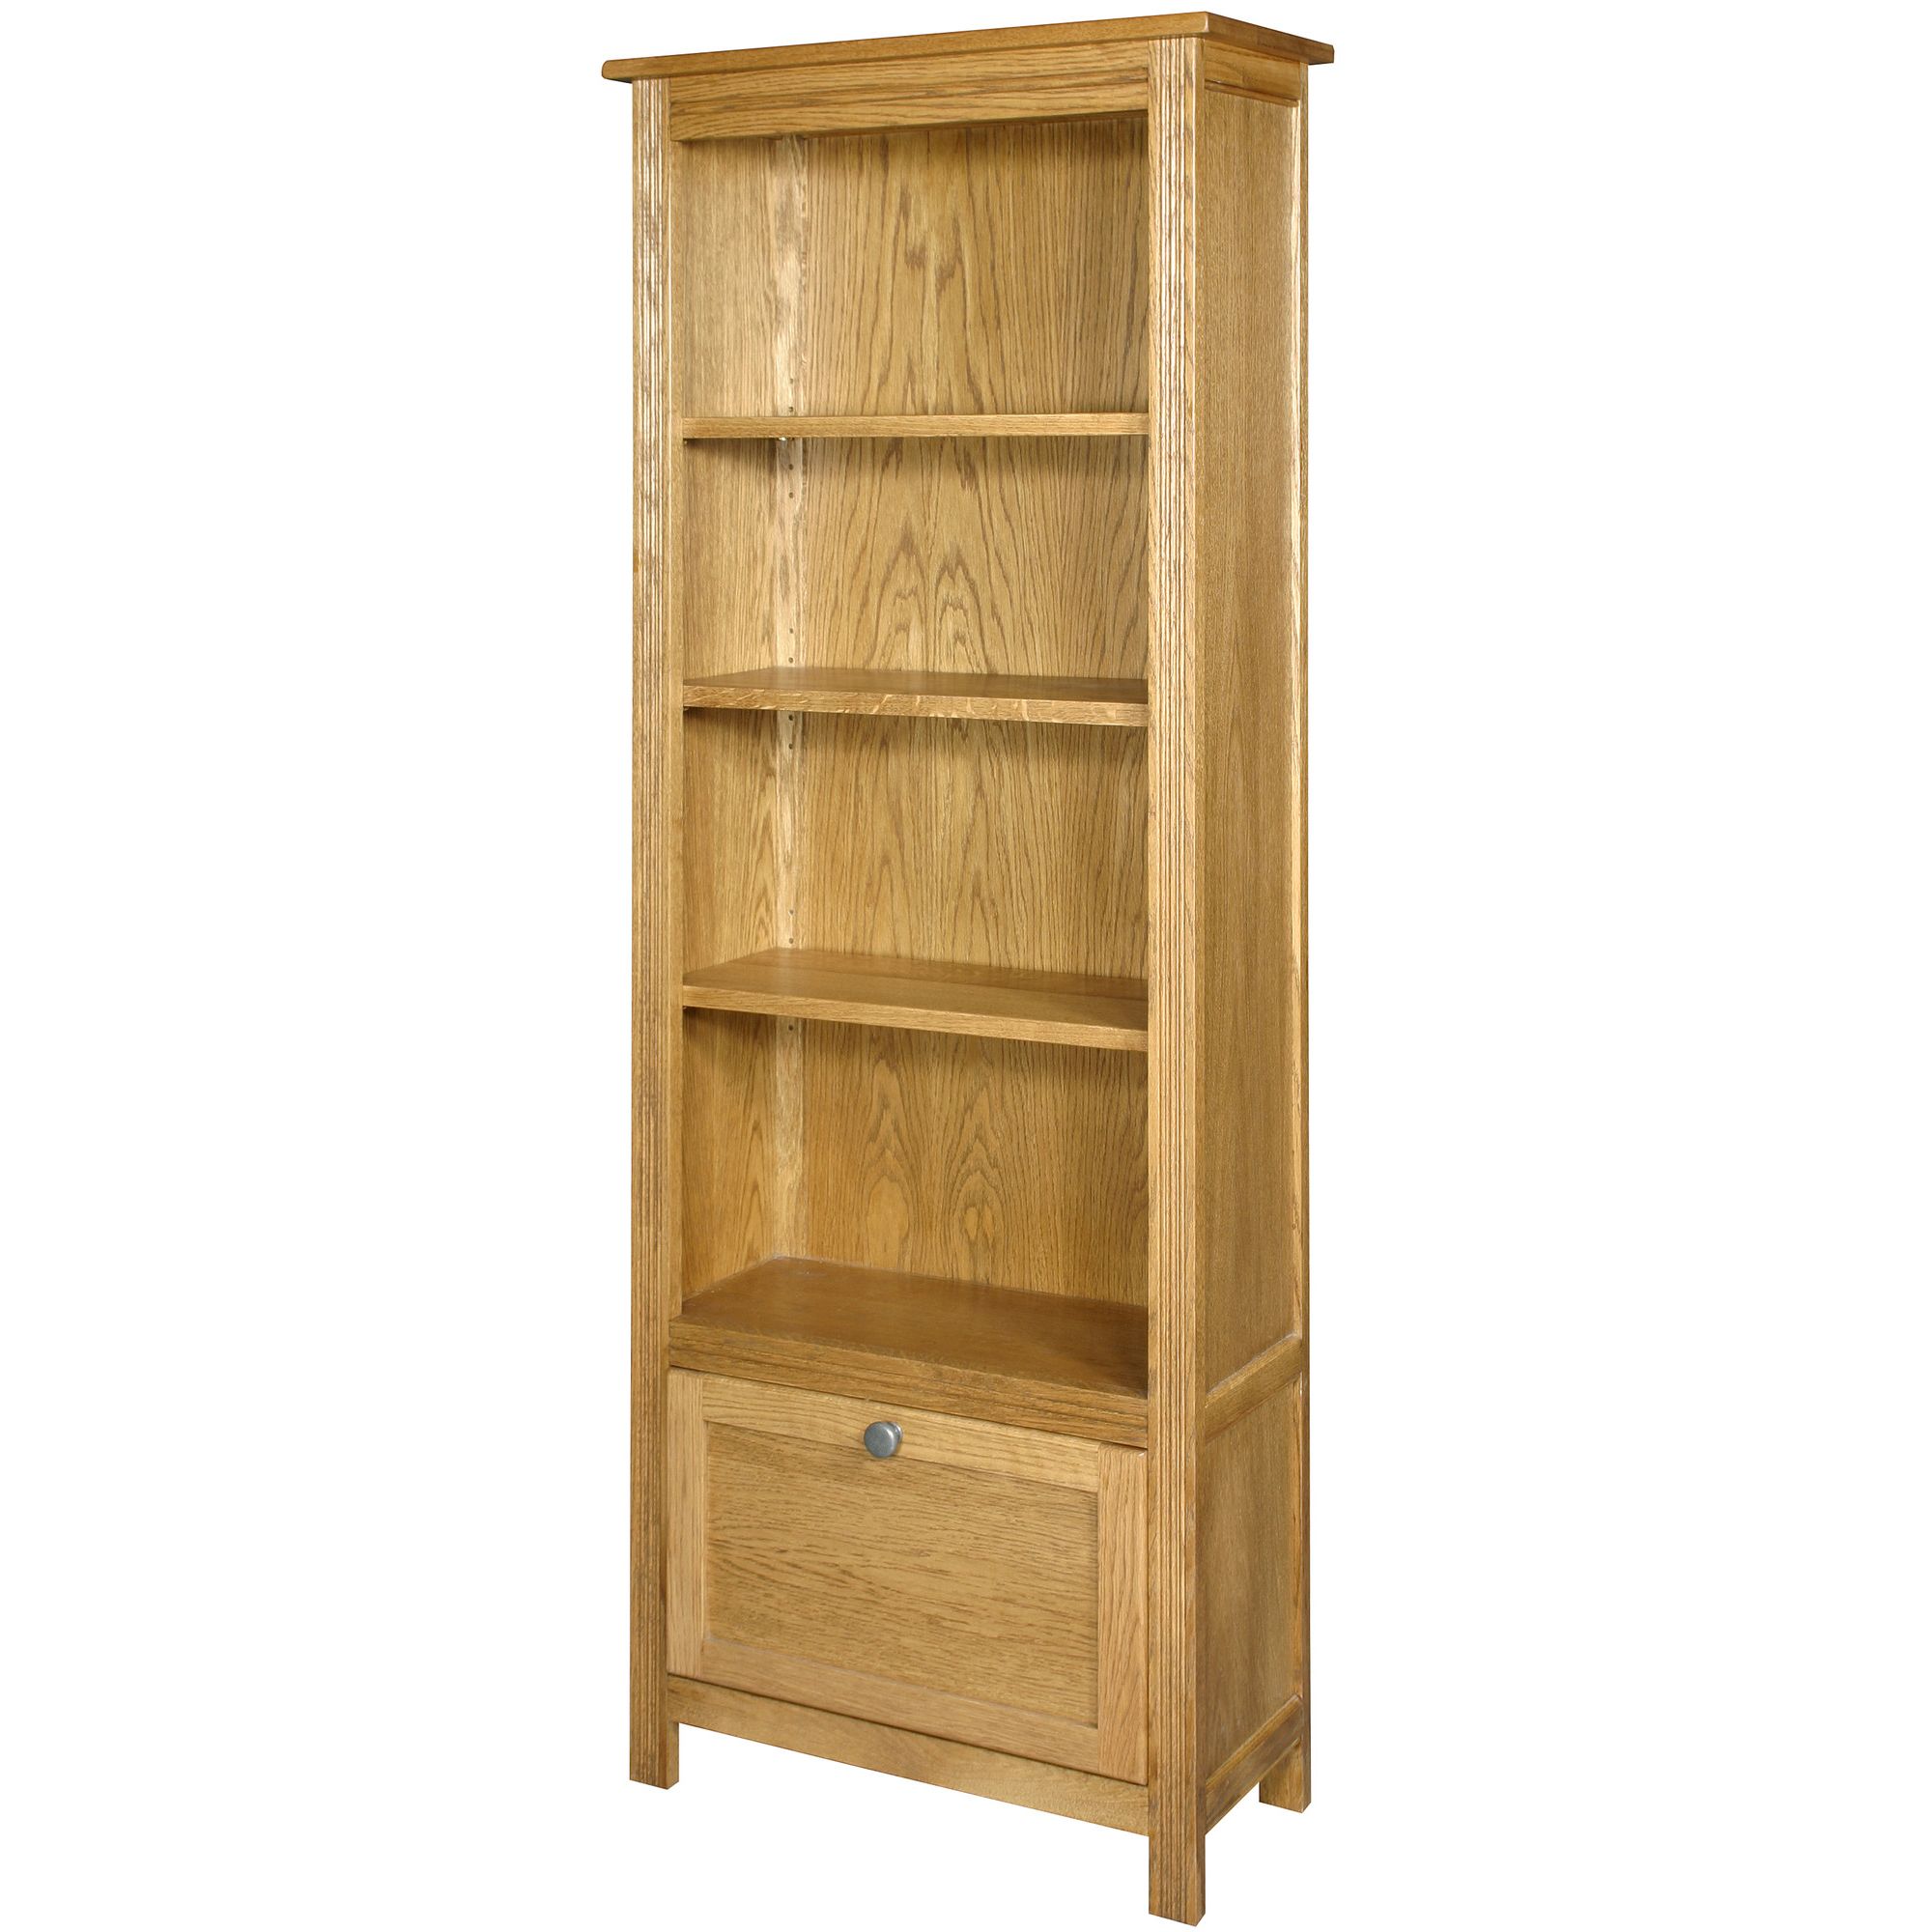 Old Charm Hertford Narrow Bookcase with Magazine Rack - Vintage at Tesco Direct